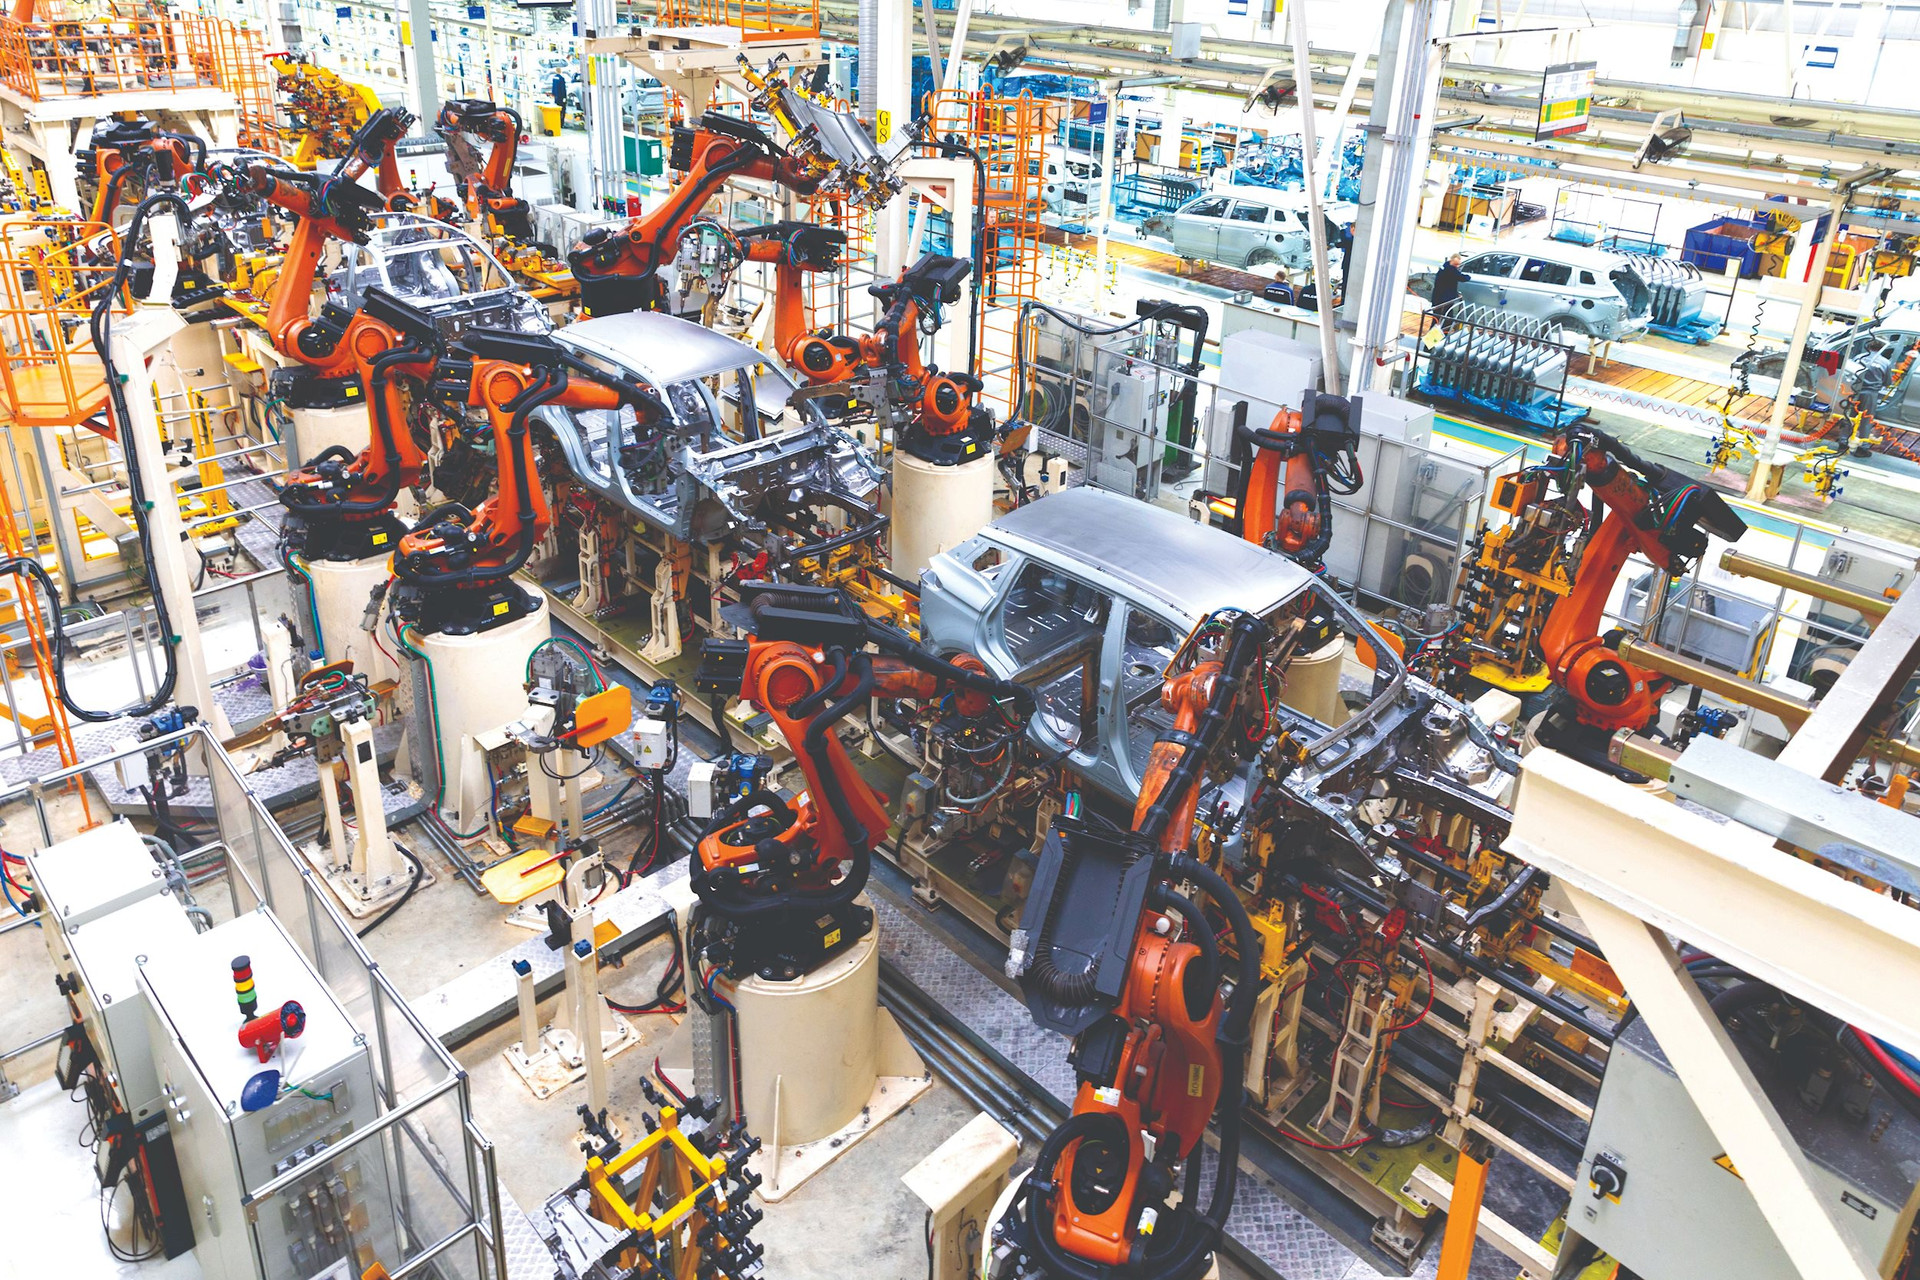 car-bodies-are-assembly-line-factory-production-cars-modern-automotive-industry-electric-car-factory-conveyor-compressed.jpeg